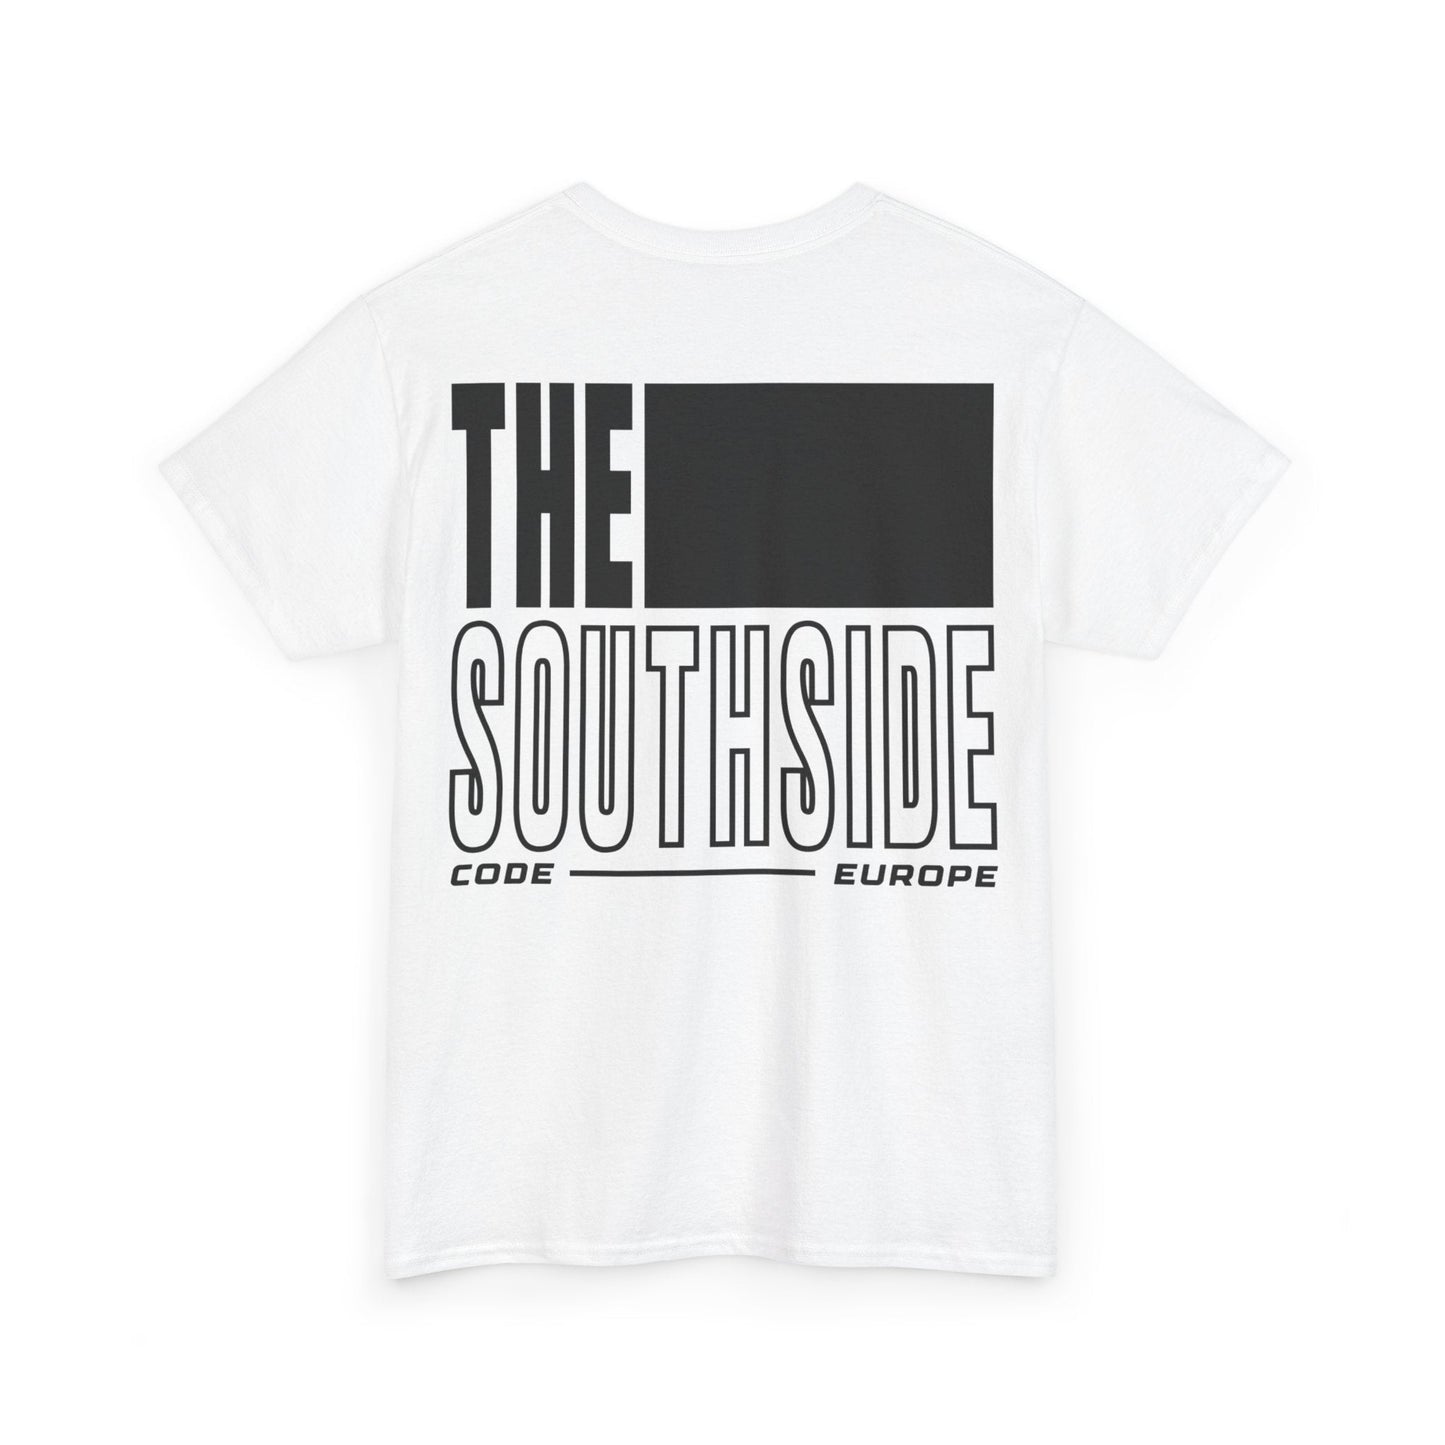 Tee NELS. 'SOUTHSIDE' Front and Back - NELS.